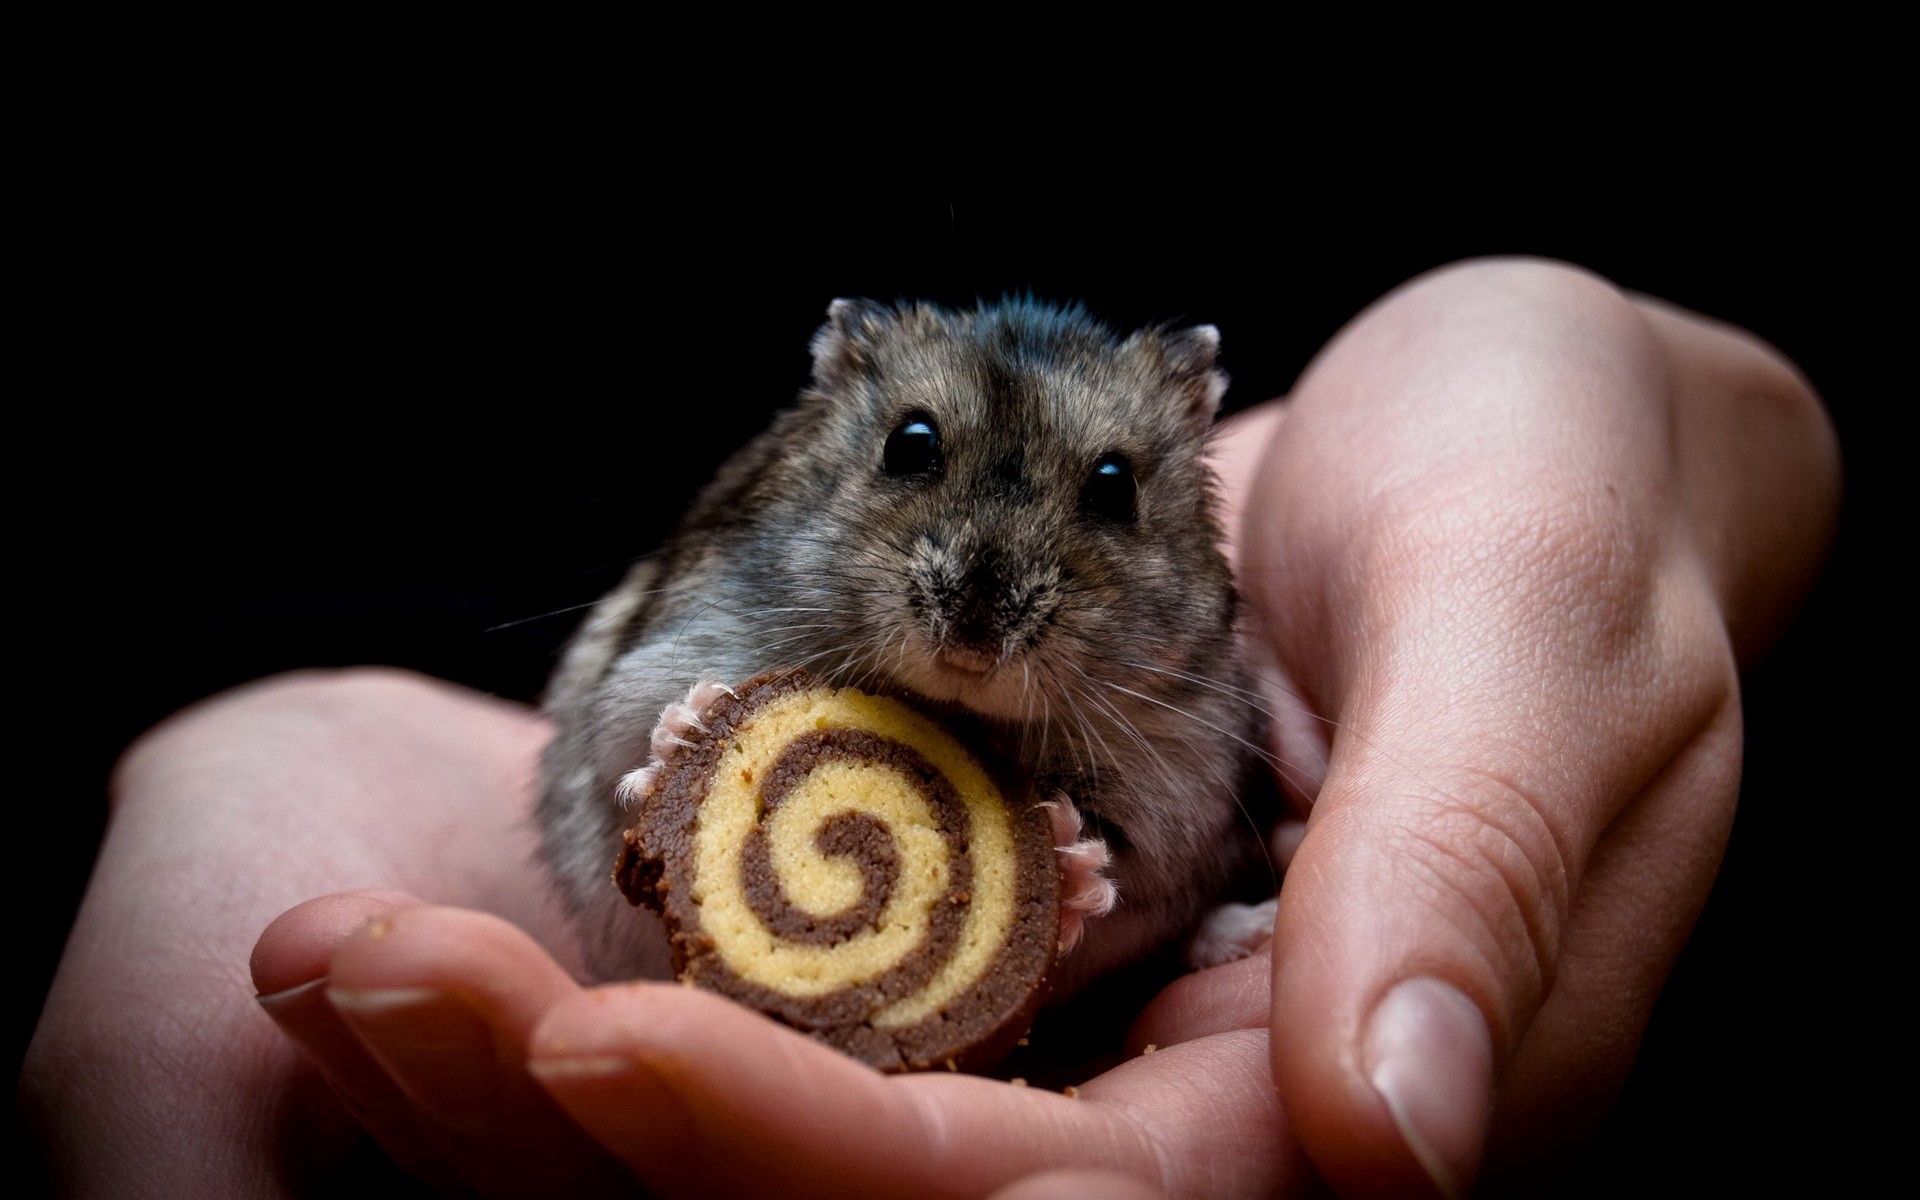 Full HD Wallpaper animals, palms, cookies, palm, hands, hamster